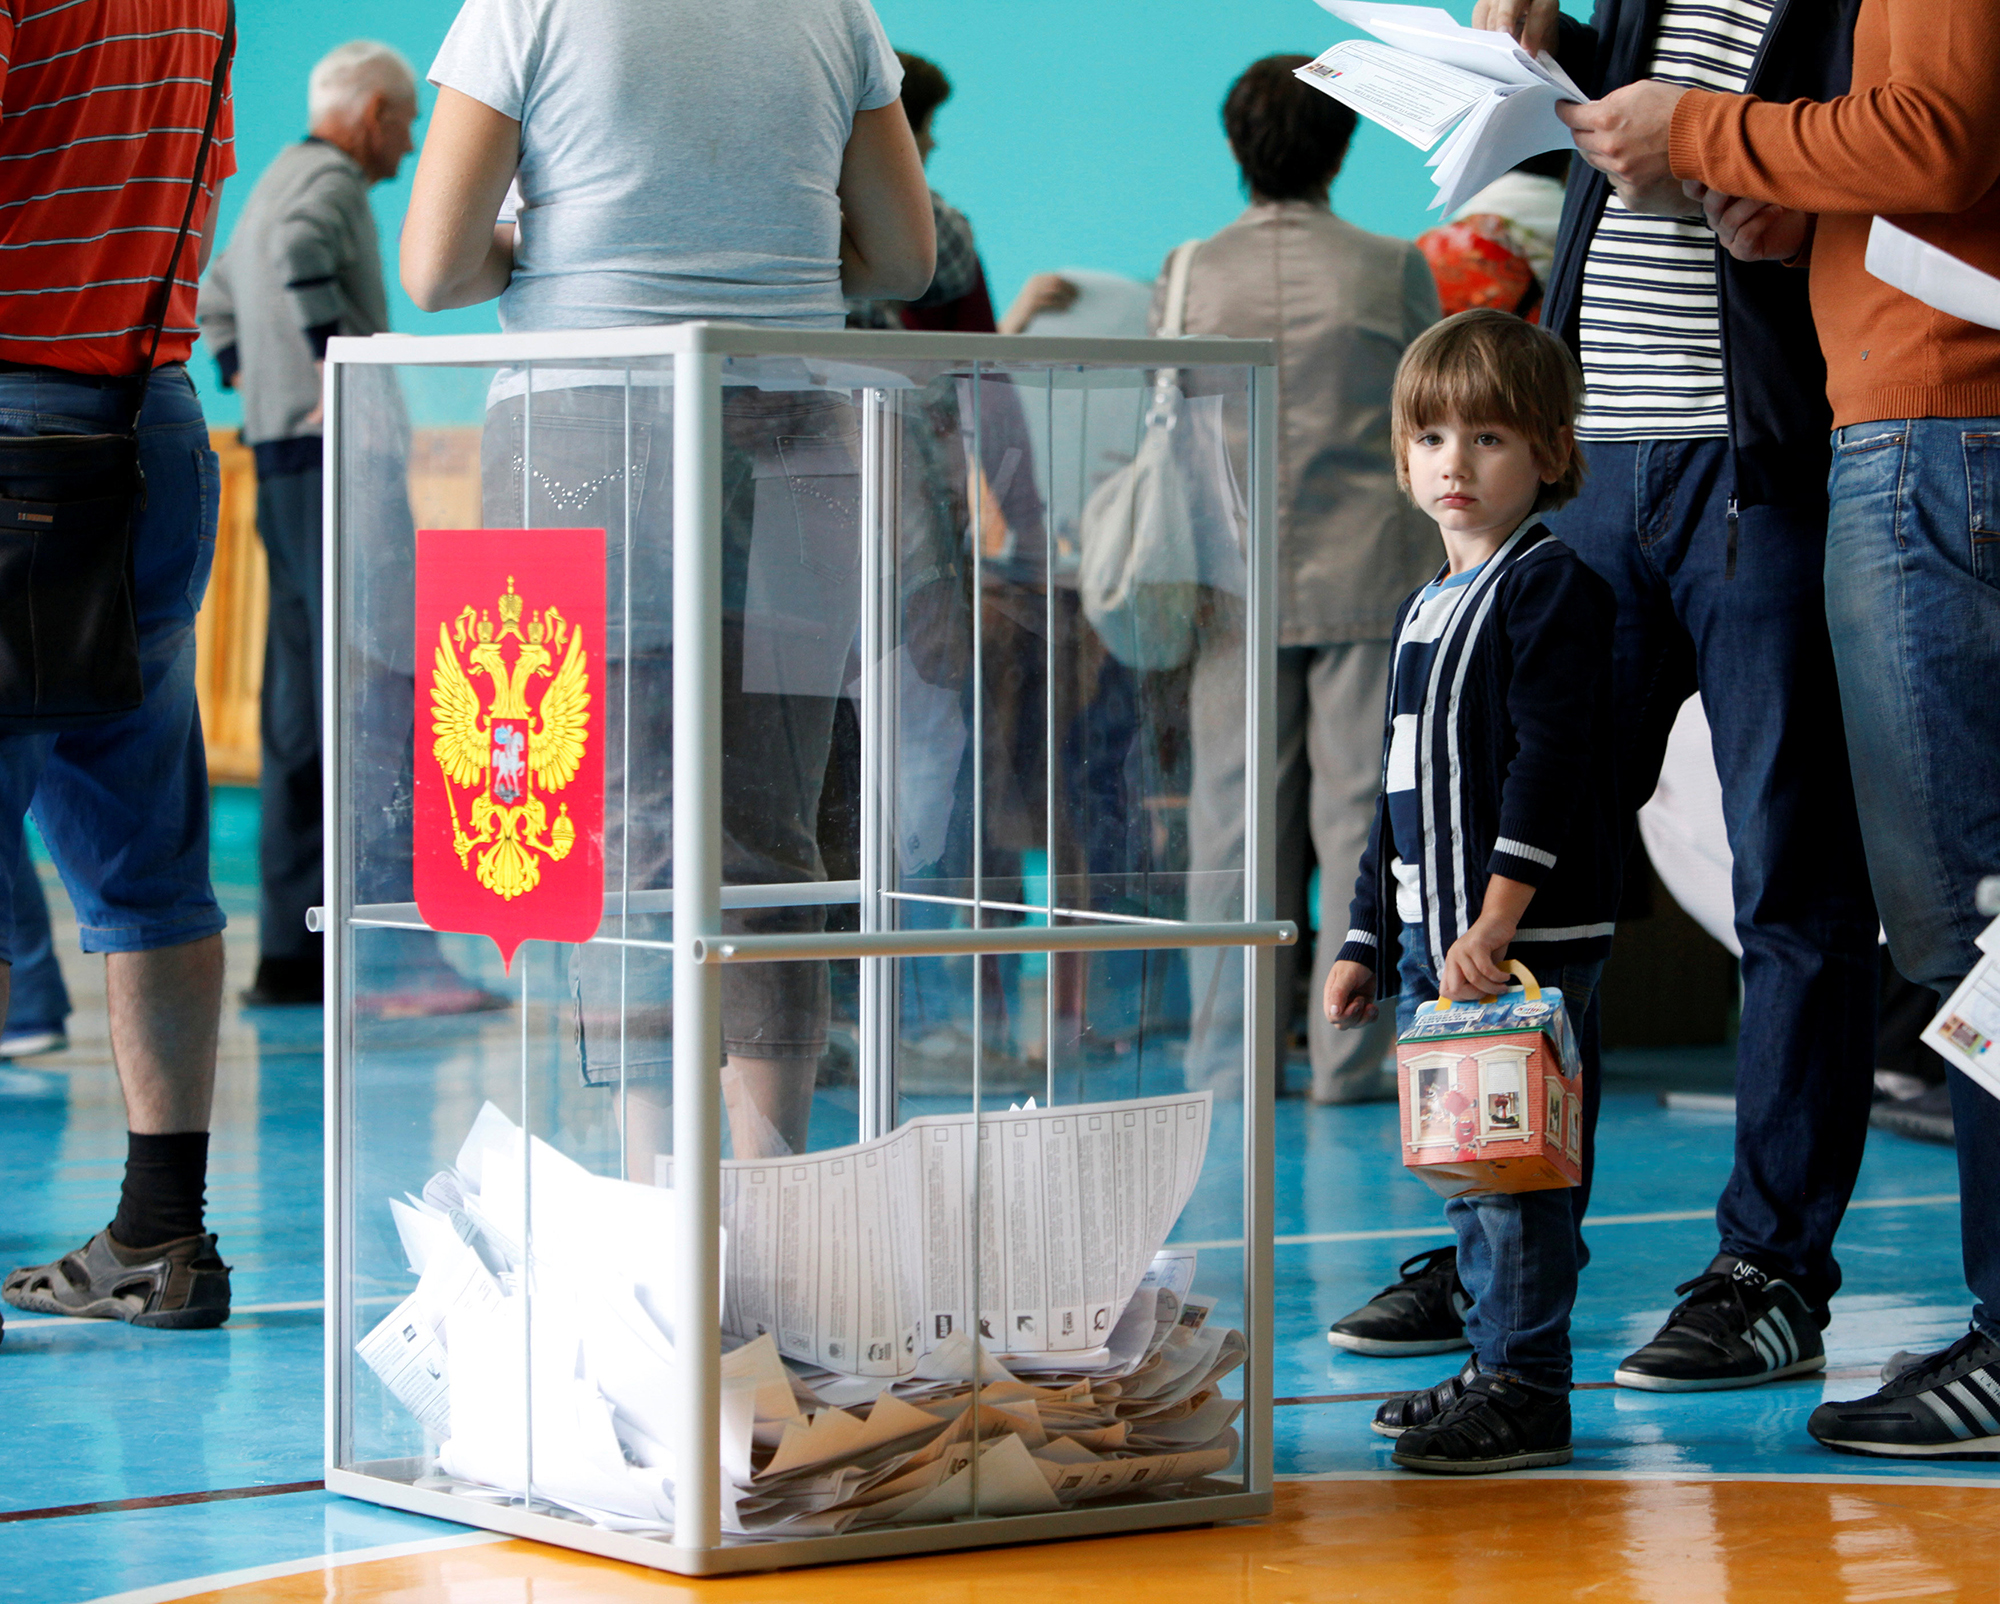 People visit a polling station during a parliamentary election in Stavropol, Russia, September 18, 2016. REUTERS/Eduard Korniyenko